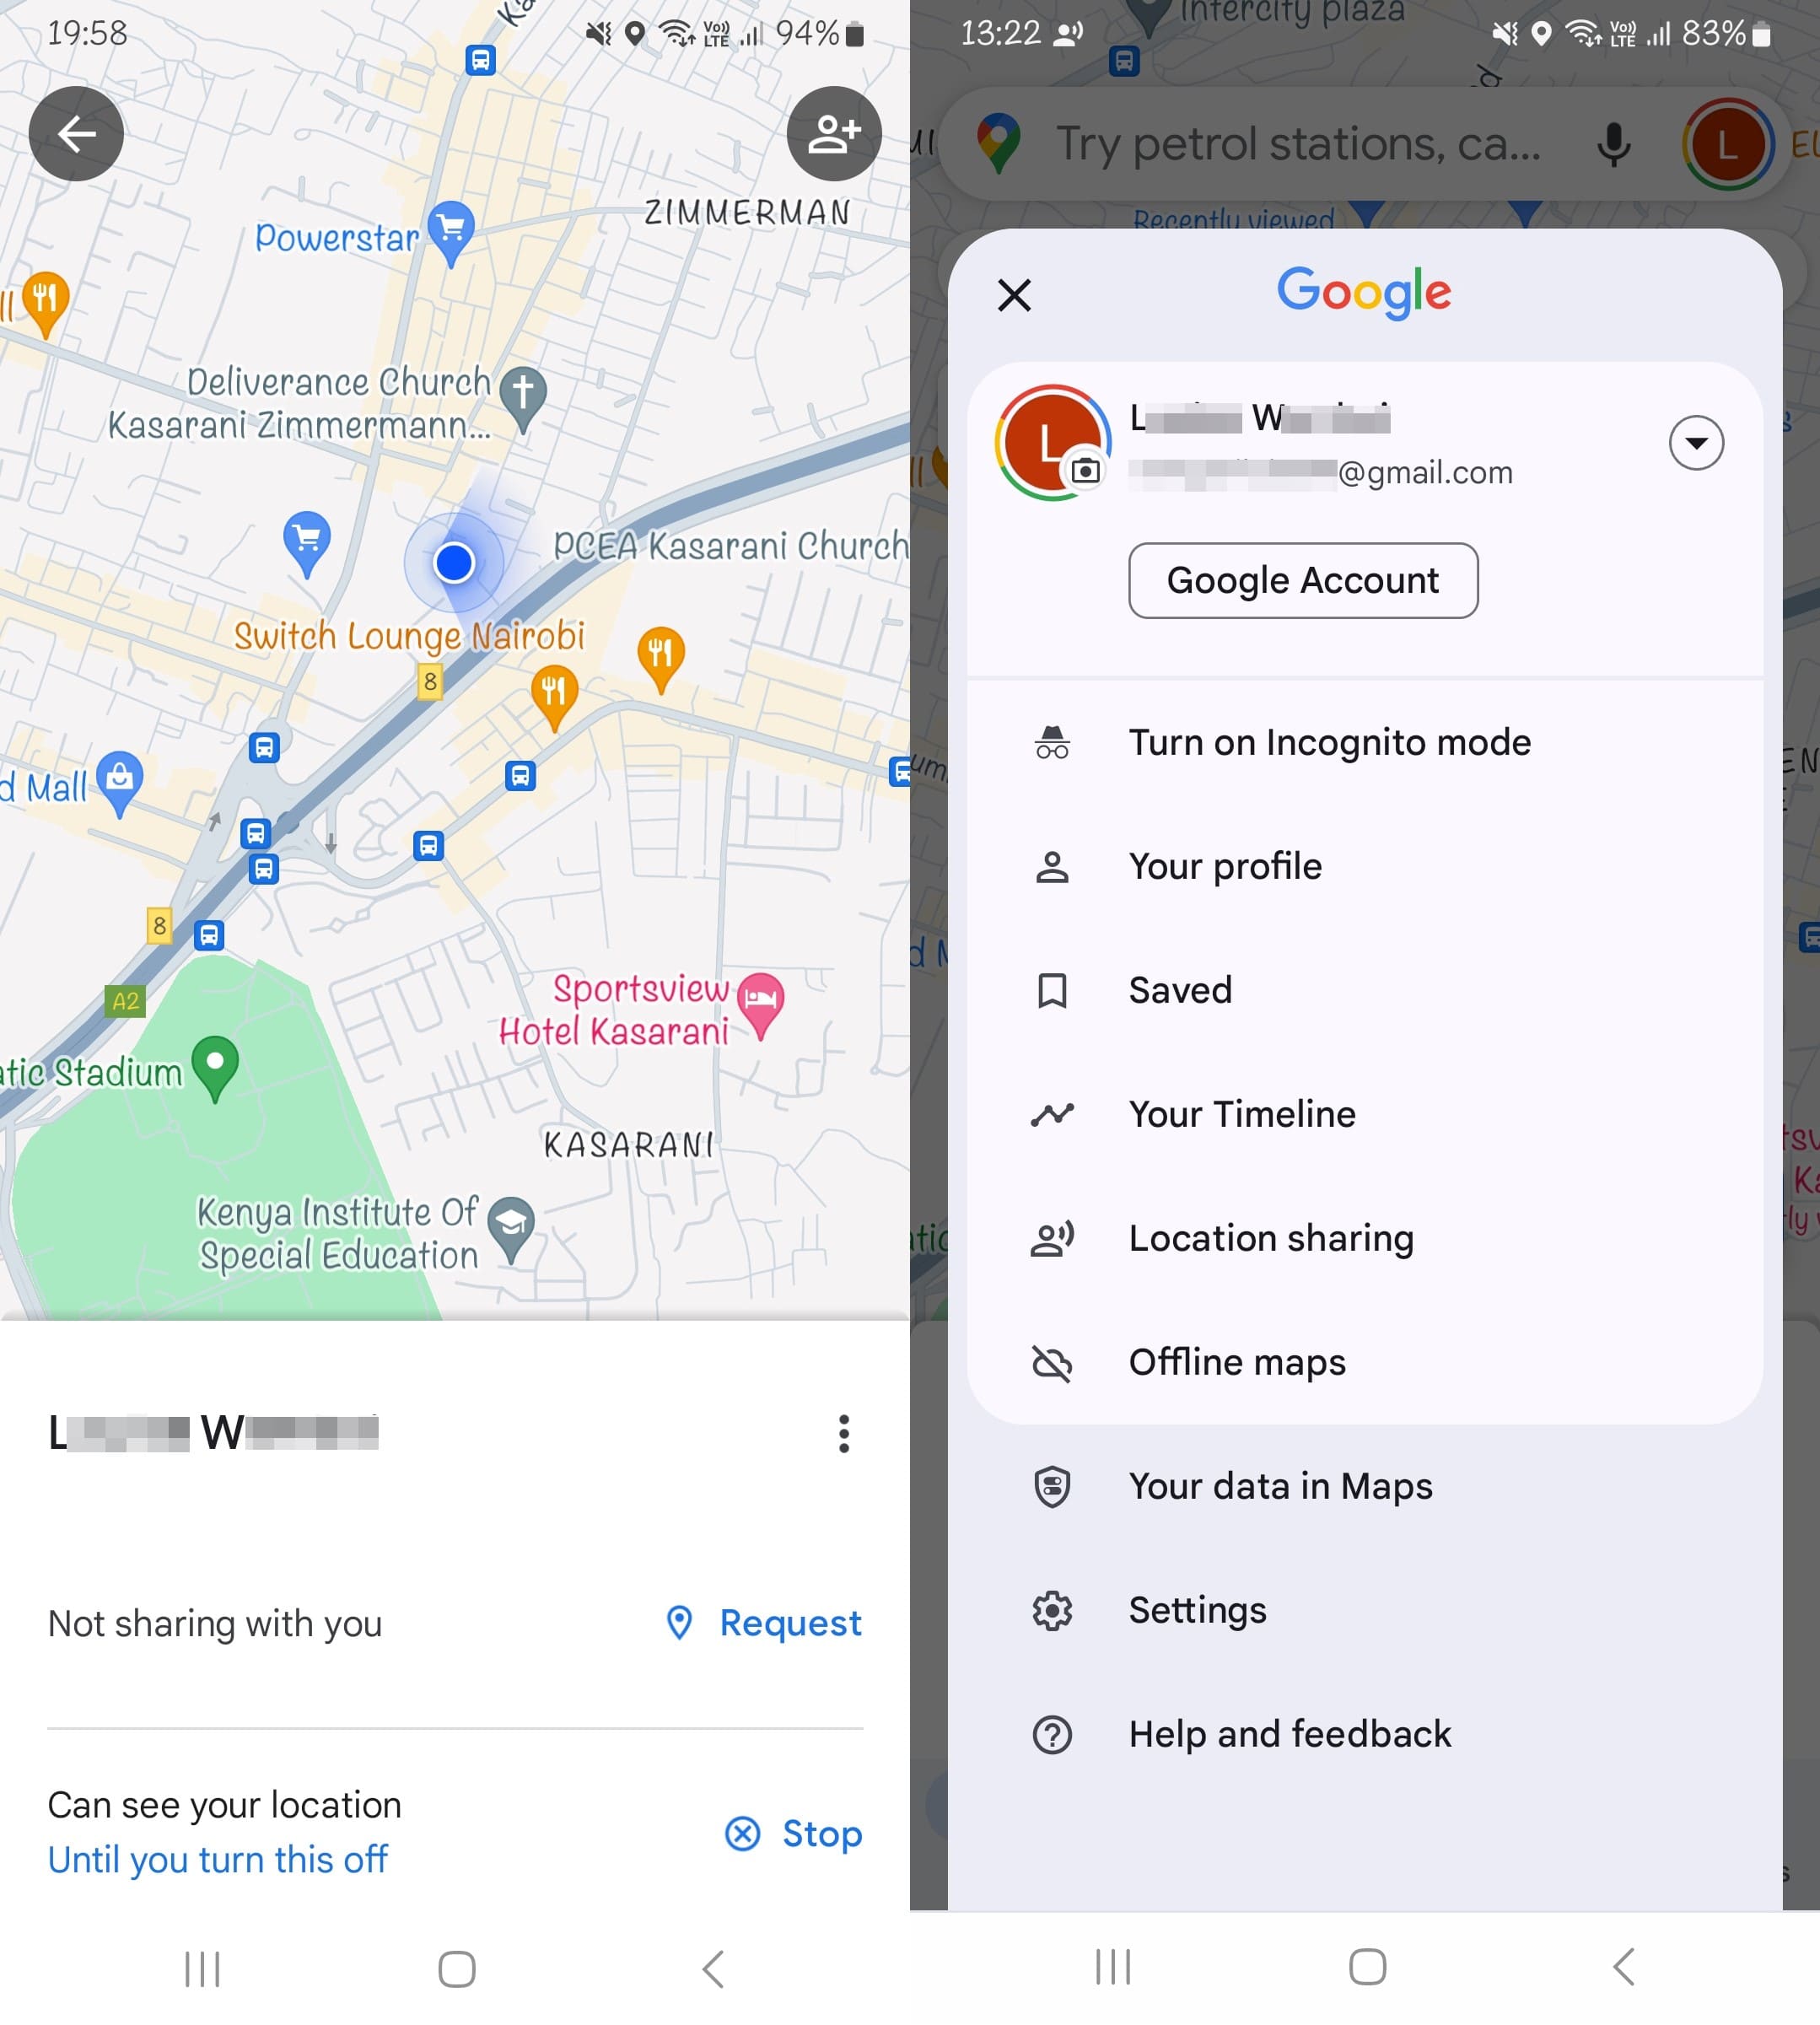 How to access “Your Timeline” on Google Maps